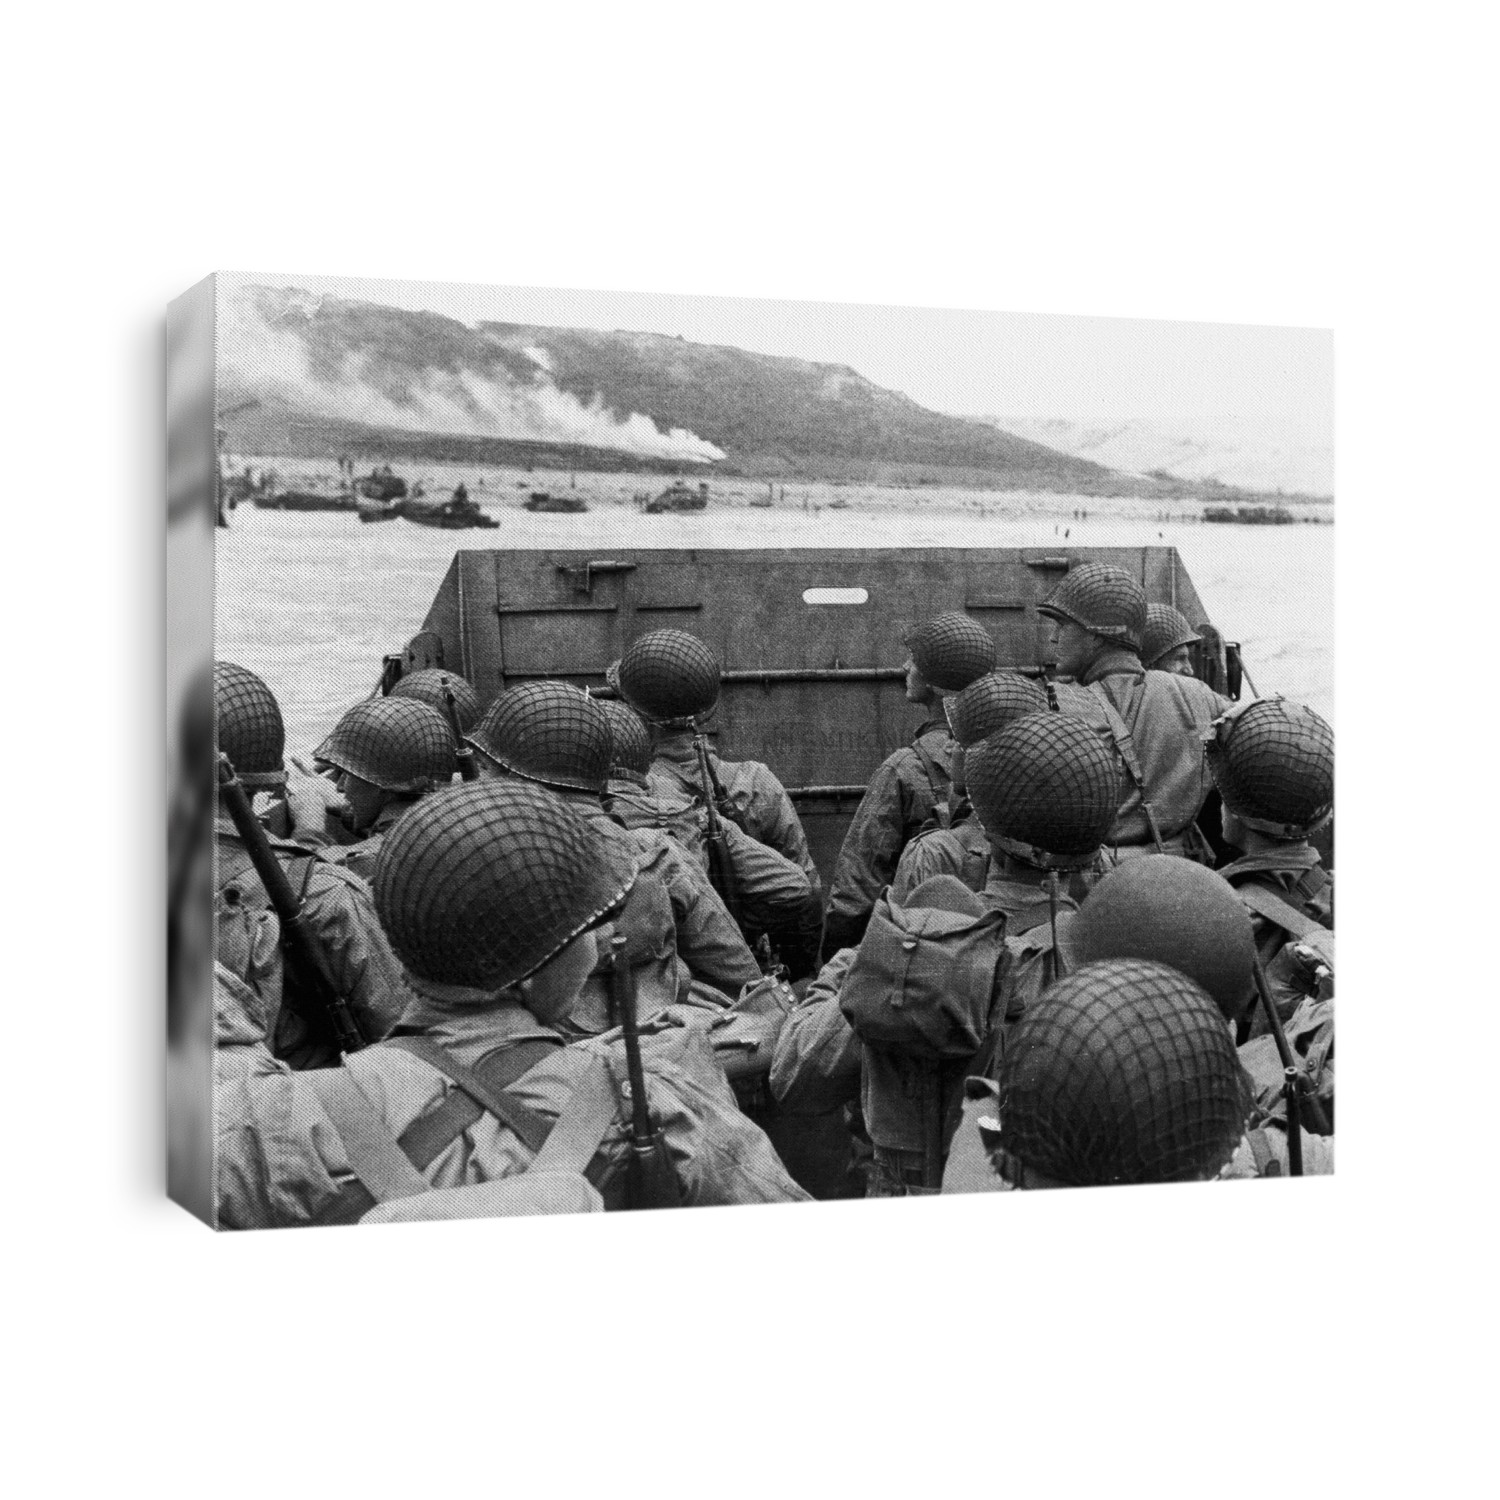 D-Day landings. US assault troops in a landing craft behind its protective shield as it nears a beachhead on the northern coast of France during the D-Day landings. Smoke in the background is naval gunfire supporting the landing. US troops landed at Utah Beach and Omaha Beach. The D-Day landings of 6 June 1944 were the largest seaborne invasion in history. They successfully liberated the Normandy coast of Nazi-occupied France, contributing to the Allied victory in World War II. During the landings, the Allied force of some 156,000 (from the UK, USA and Canada) took some 12,000 casualties and suffered more than 4000 dead.